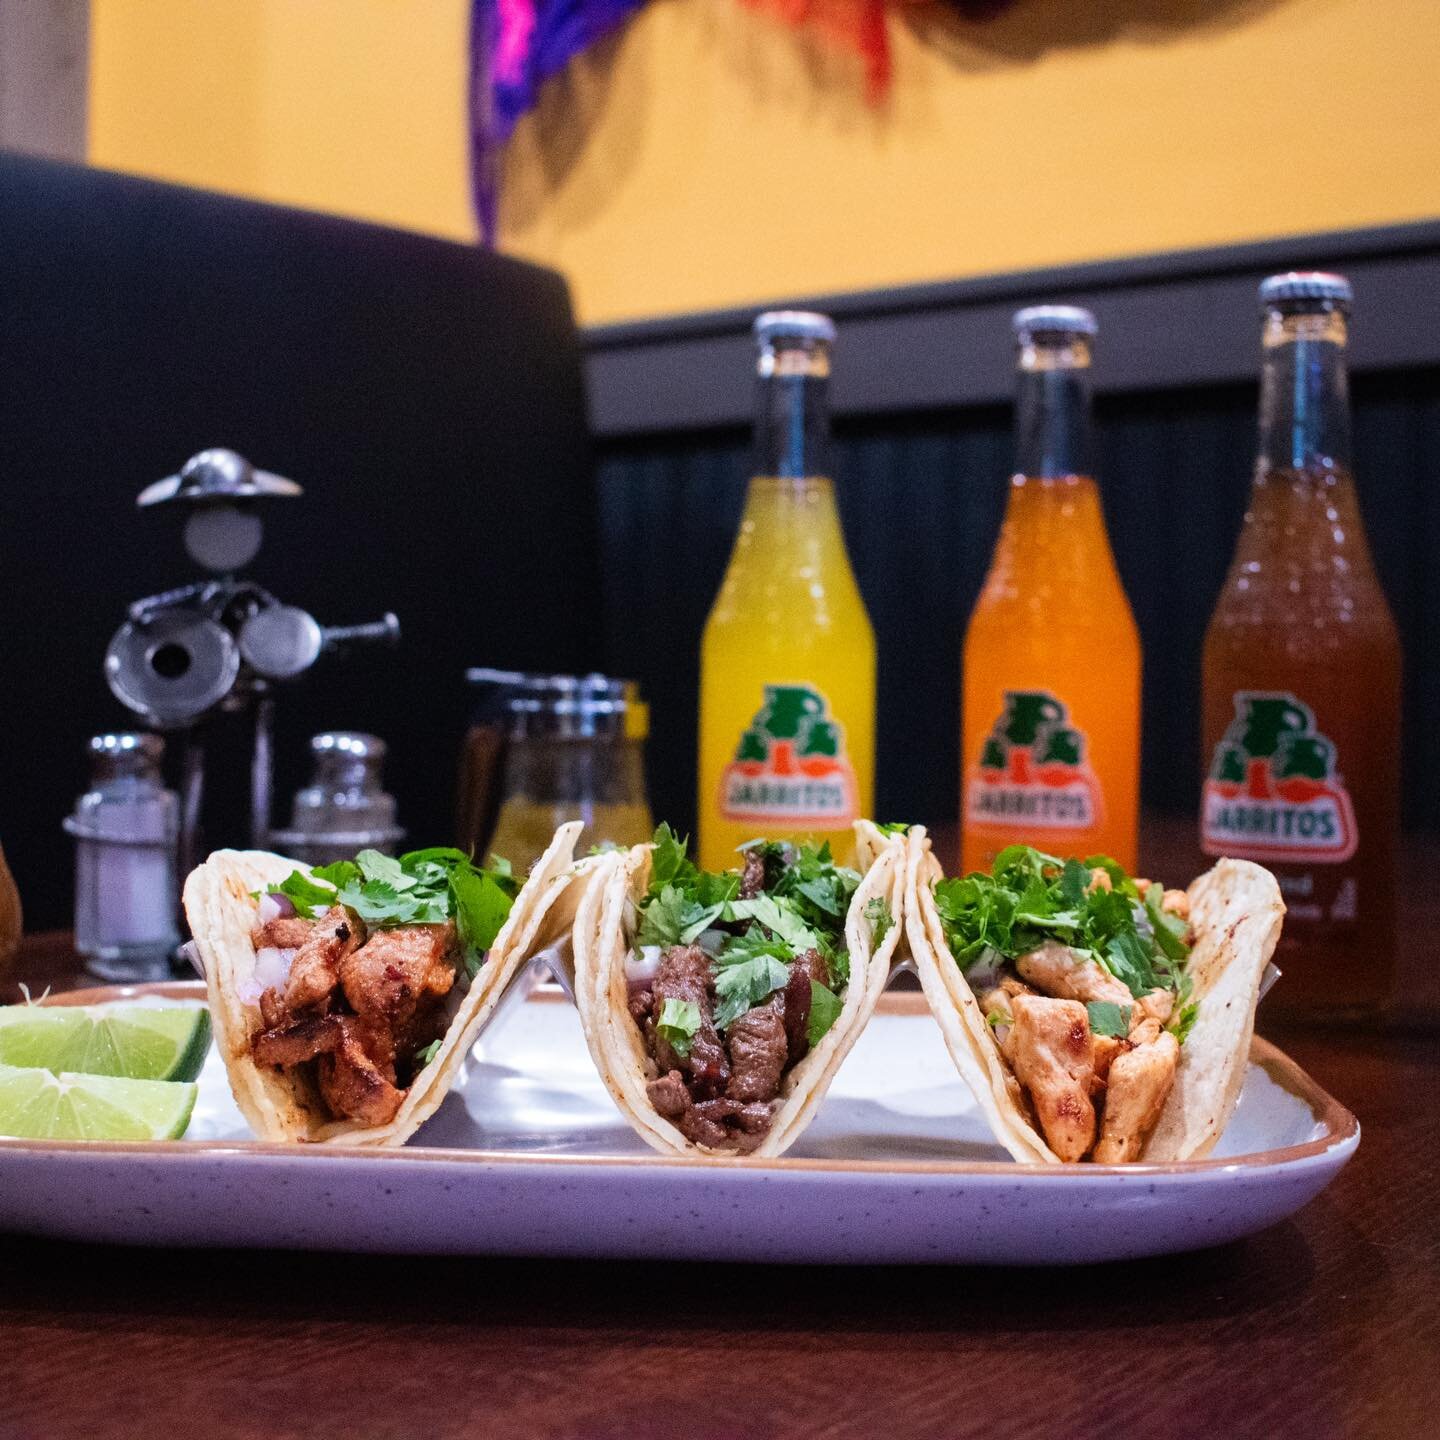 Happy Monday ☀️ Get your week started on the right note with some tasty tacos 🌮
.
.
.
#bostonfoodies #southshorema #MexicanEats #AuthenticMexican #stoughtonma #MassachusettsEats